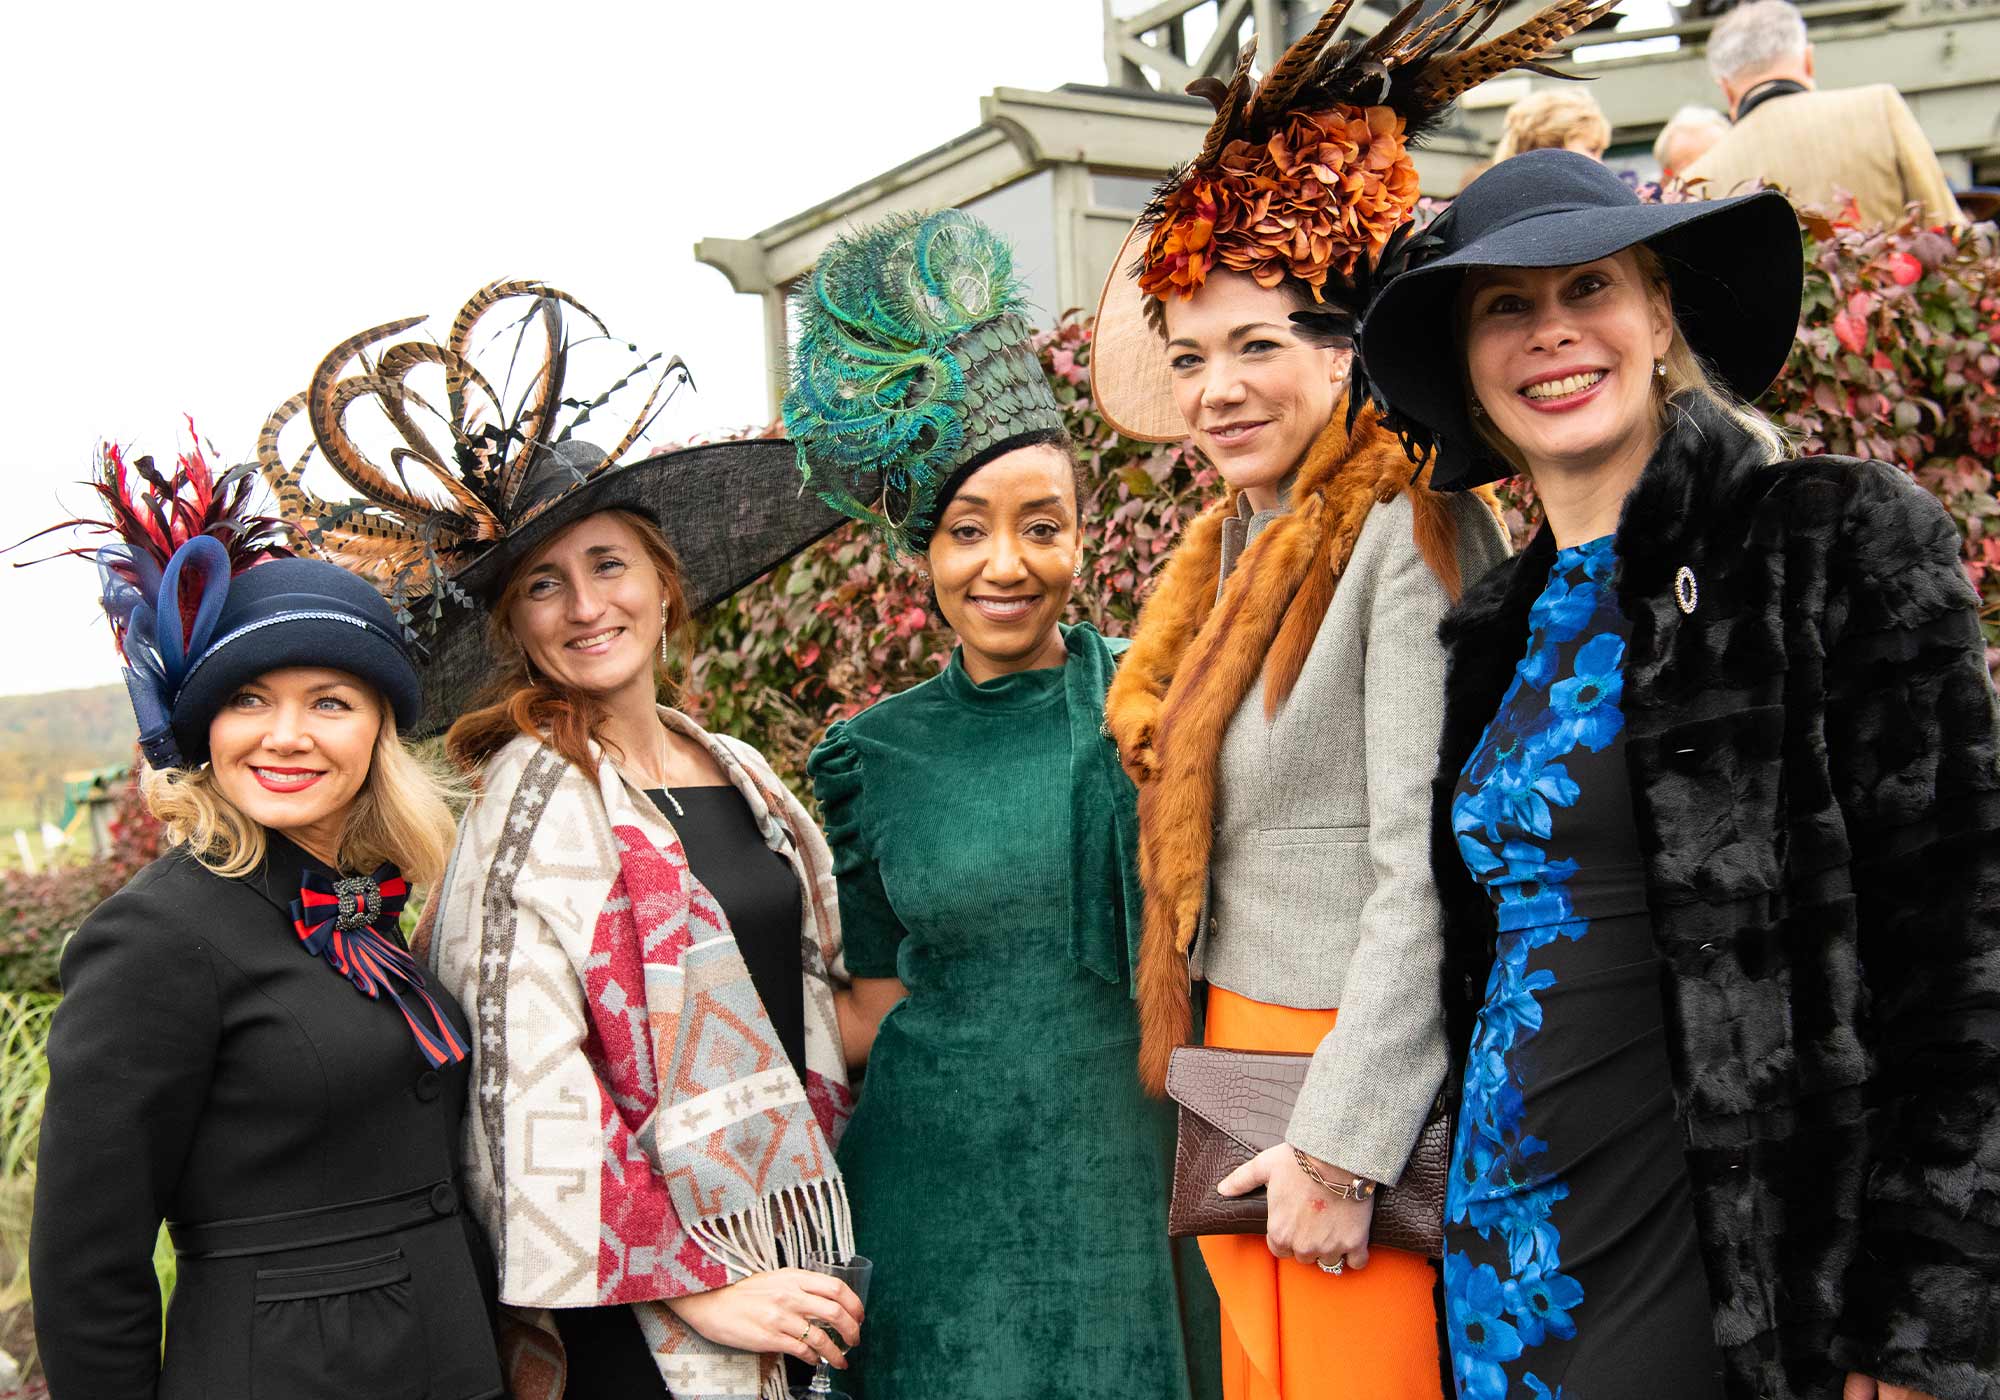 Virginia Gold Cup fashion with gorgeous hats featuring bold colors, pheasant feathers, lace, peacock feathers and more, Image: © Wine & Country Life